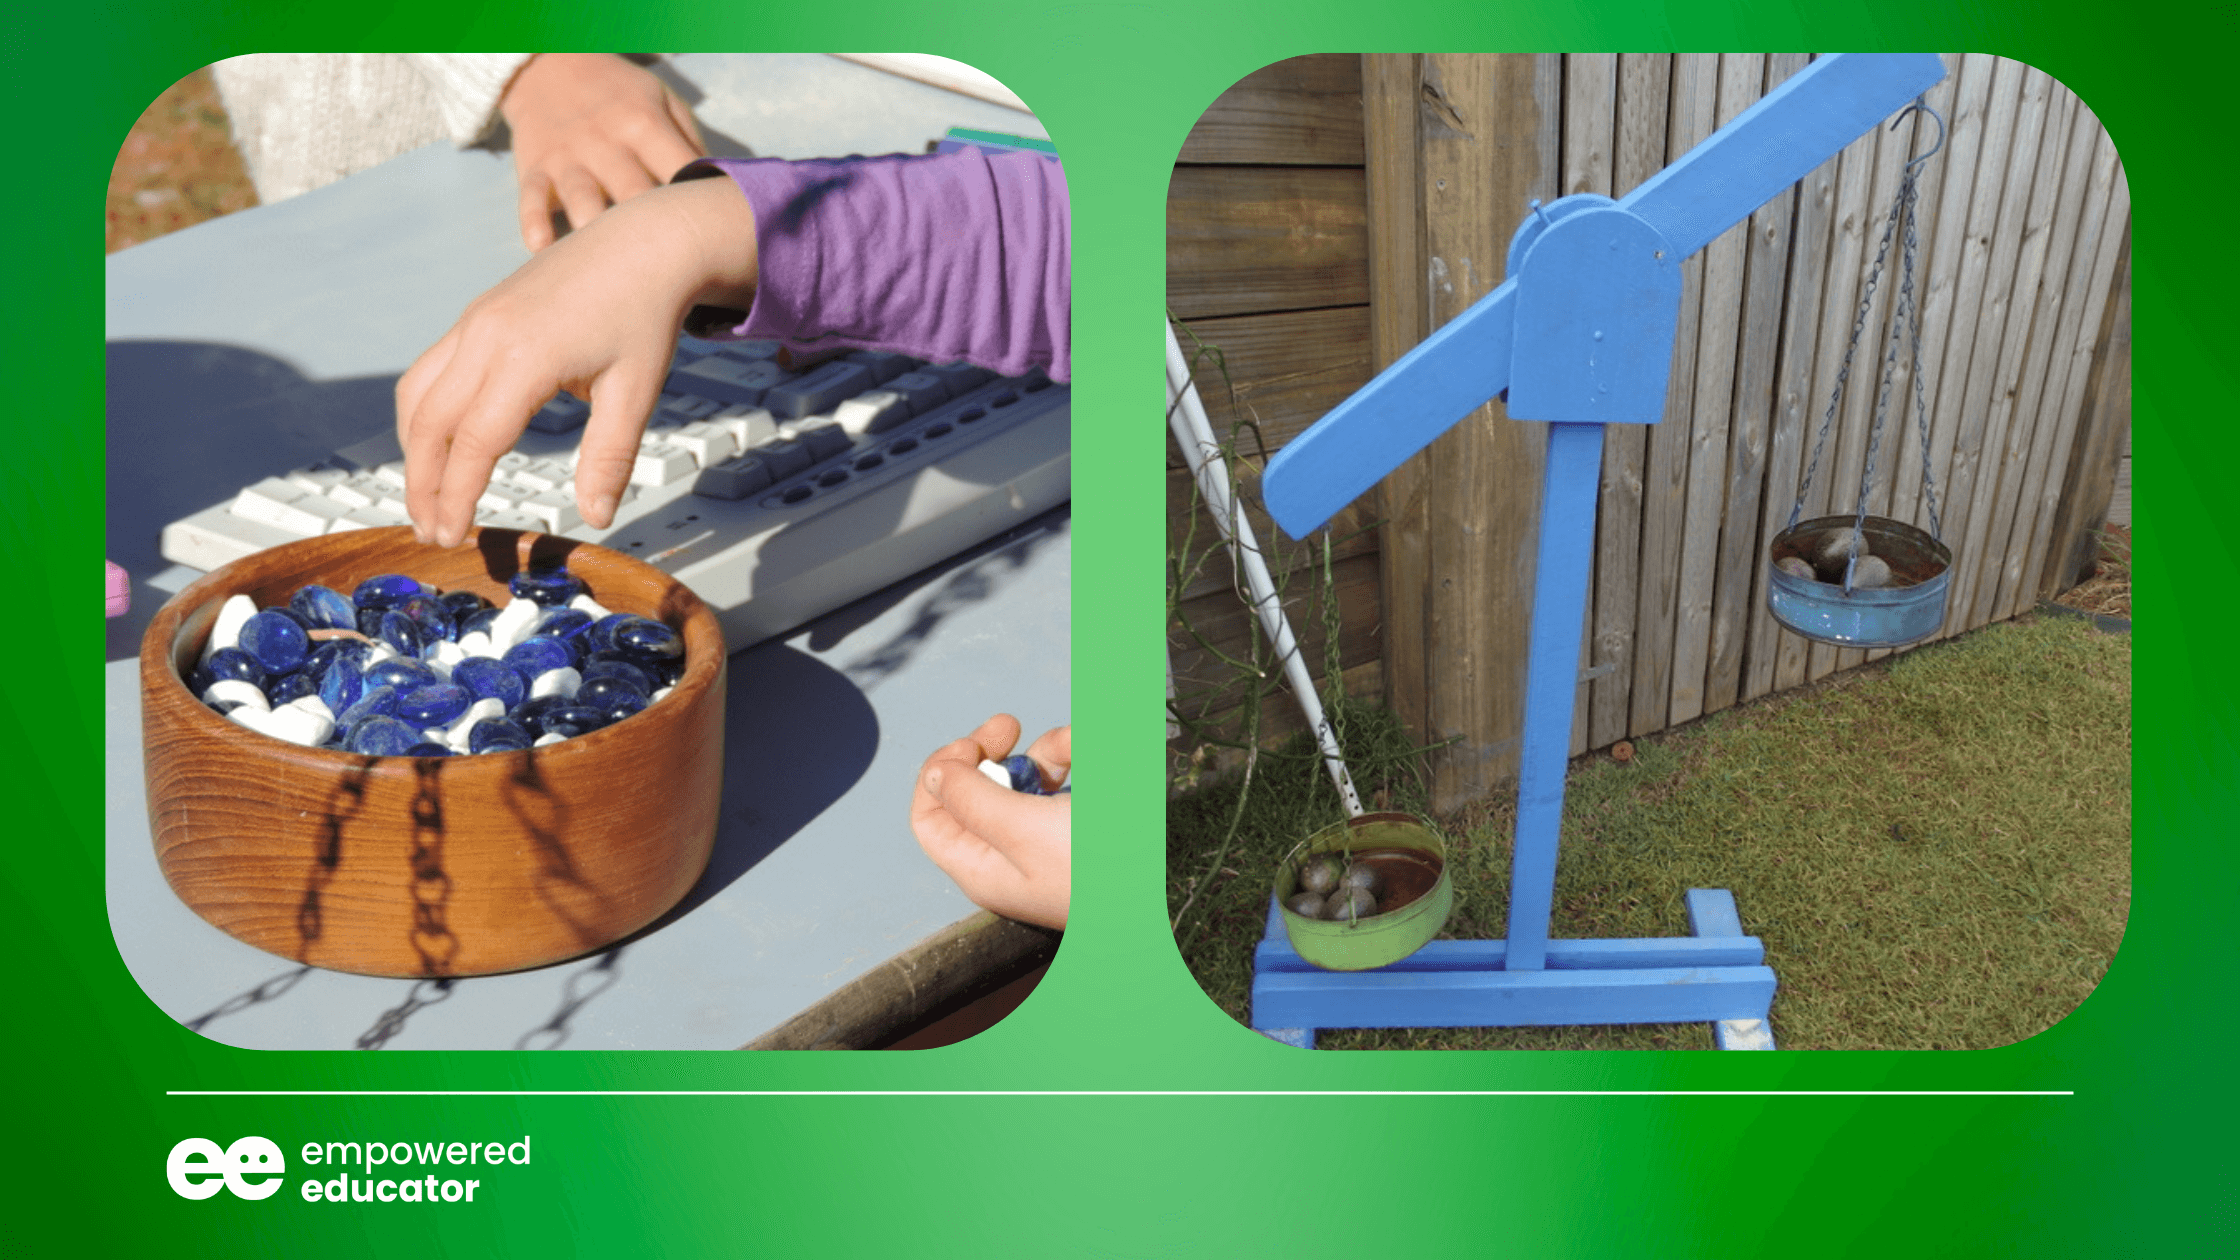 environment set up with play-based STEM activities suitable for toddlers